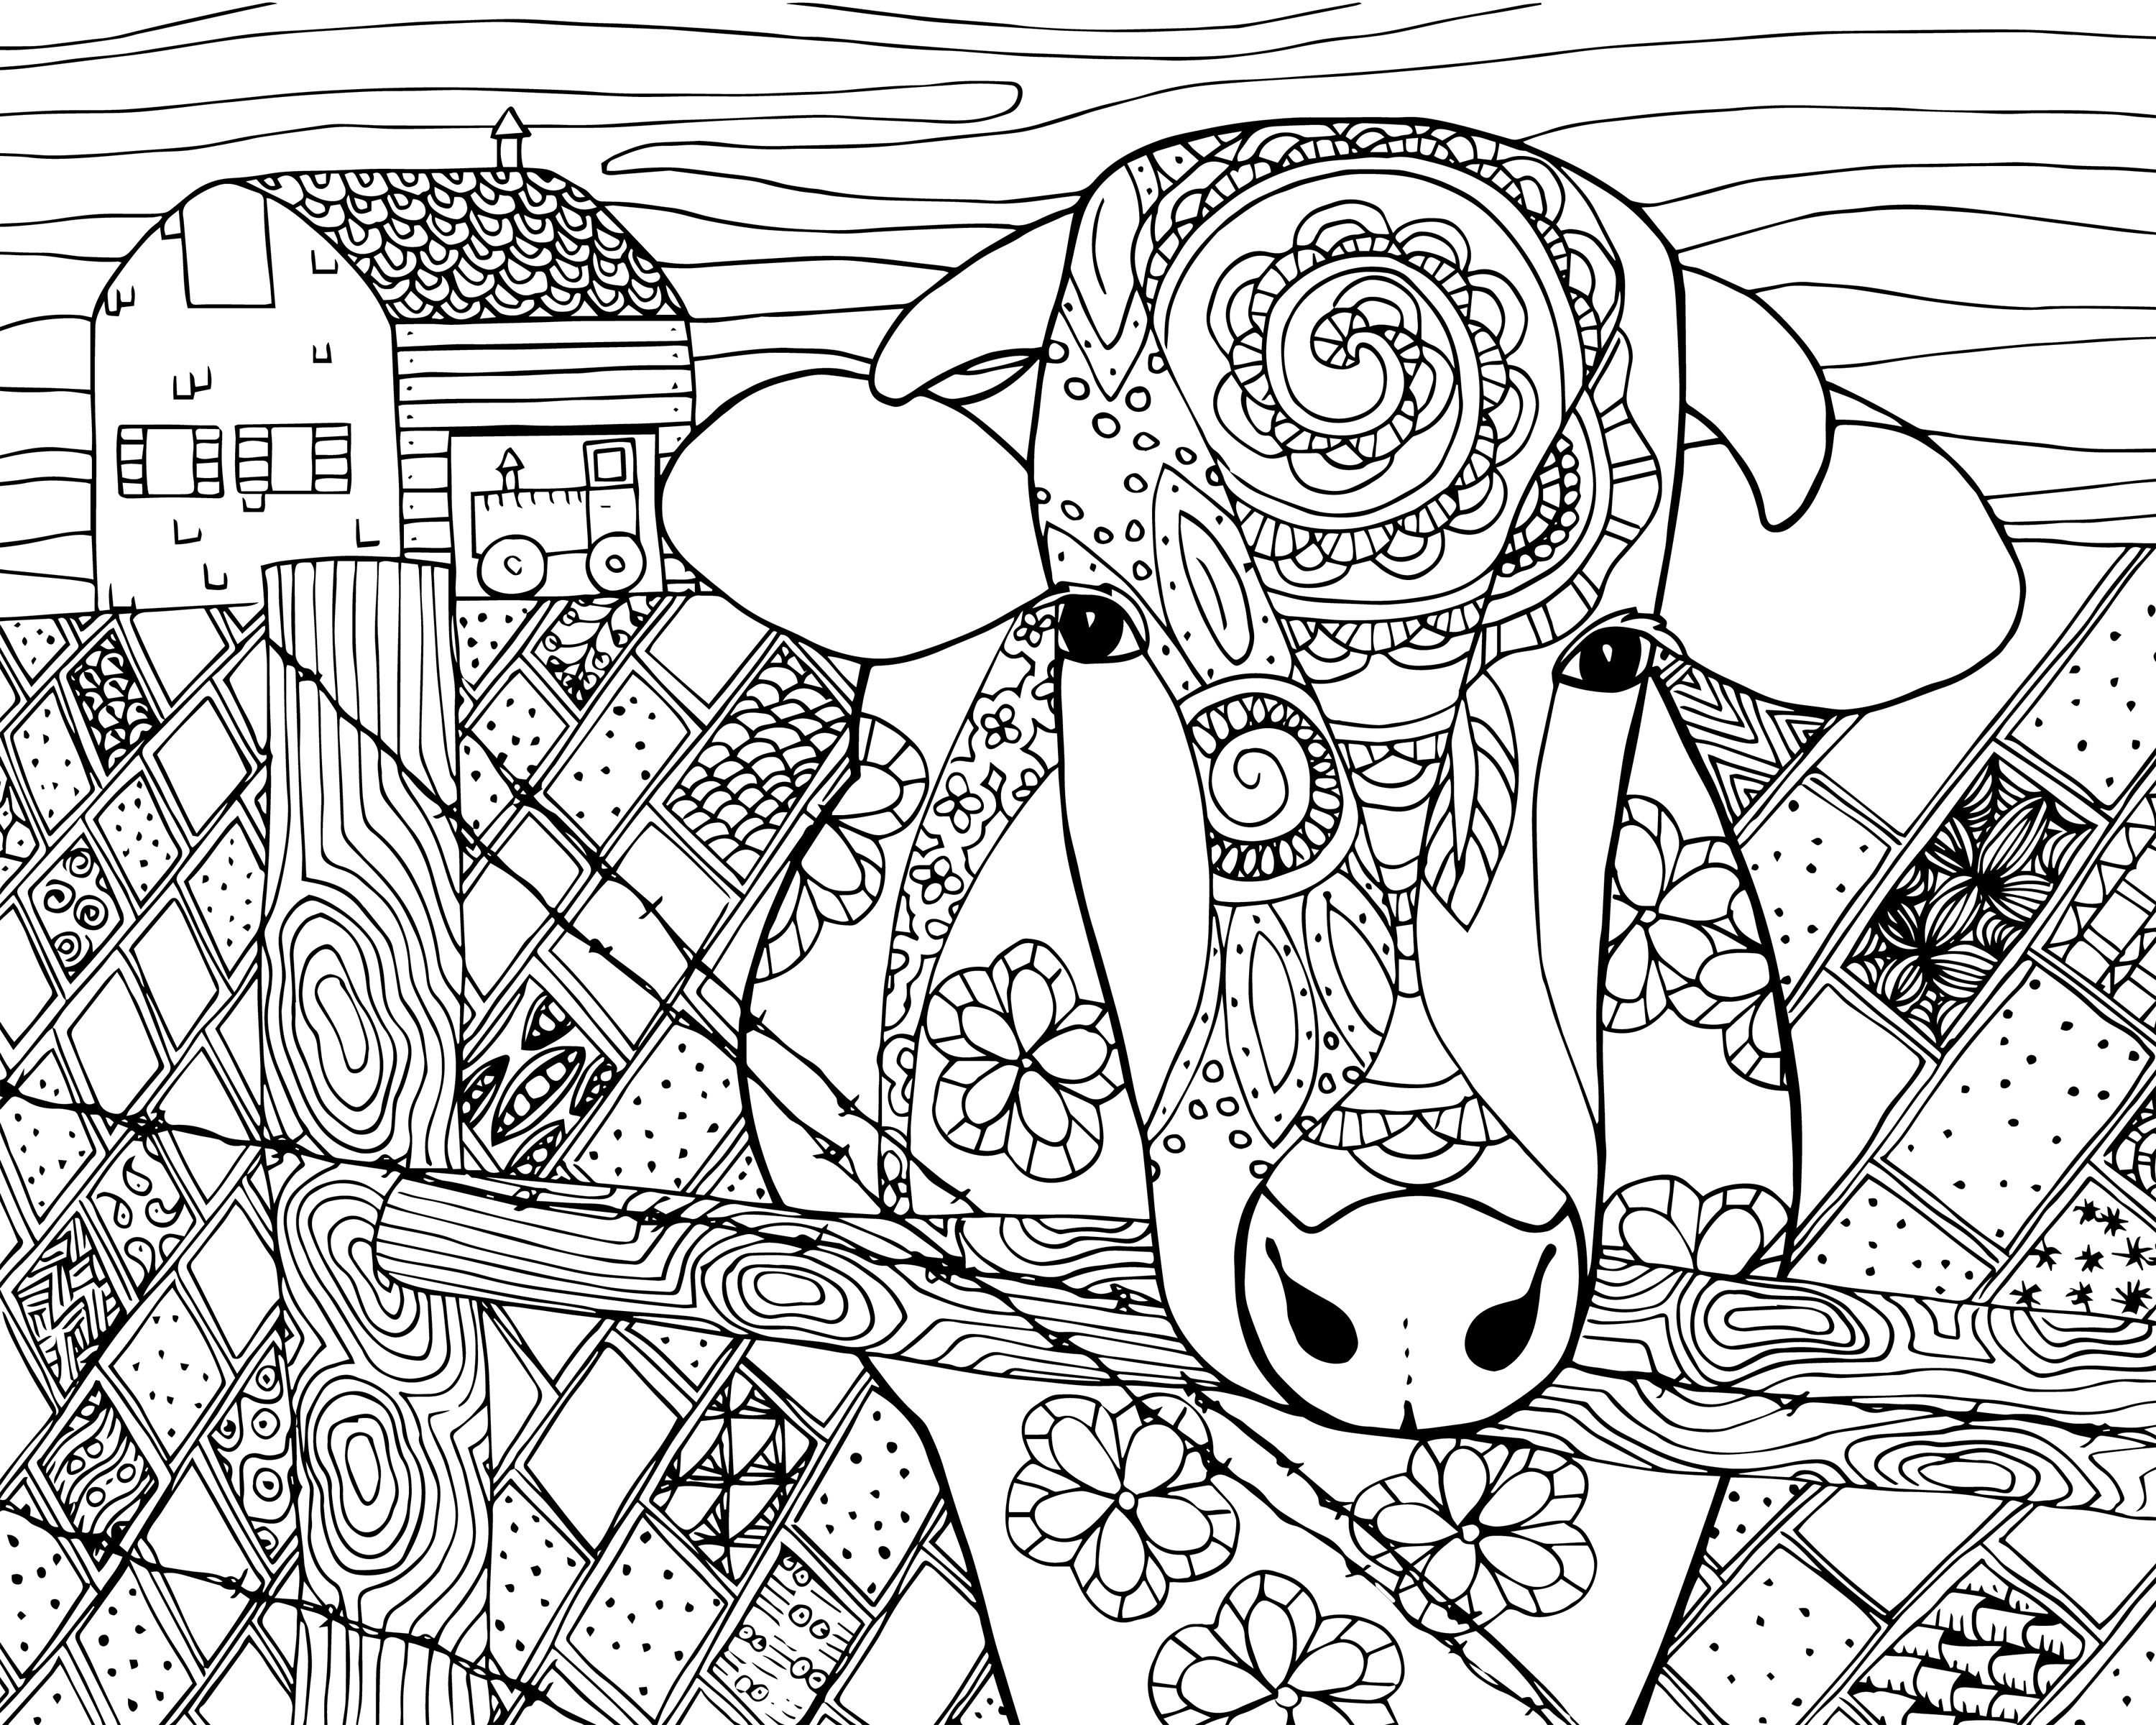 Zen Coloring Pages - Coloring Home